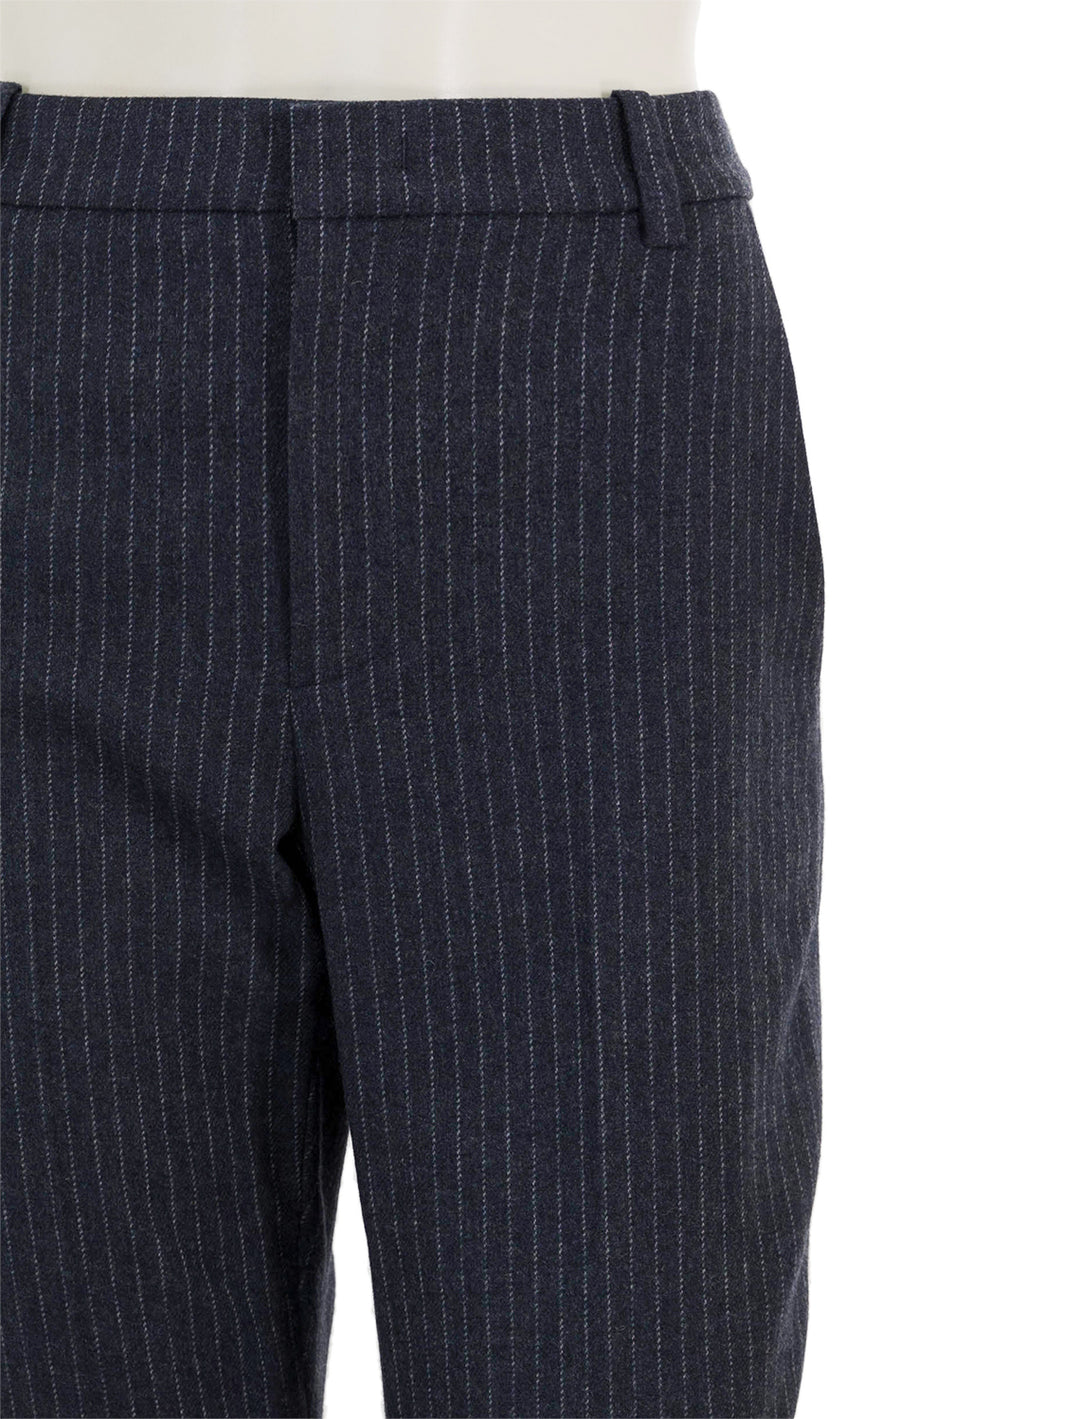 Close-up view of Vince's pinstripe flannel trouser in dark obsidian.